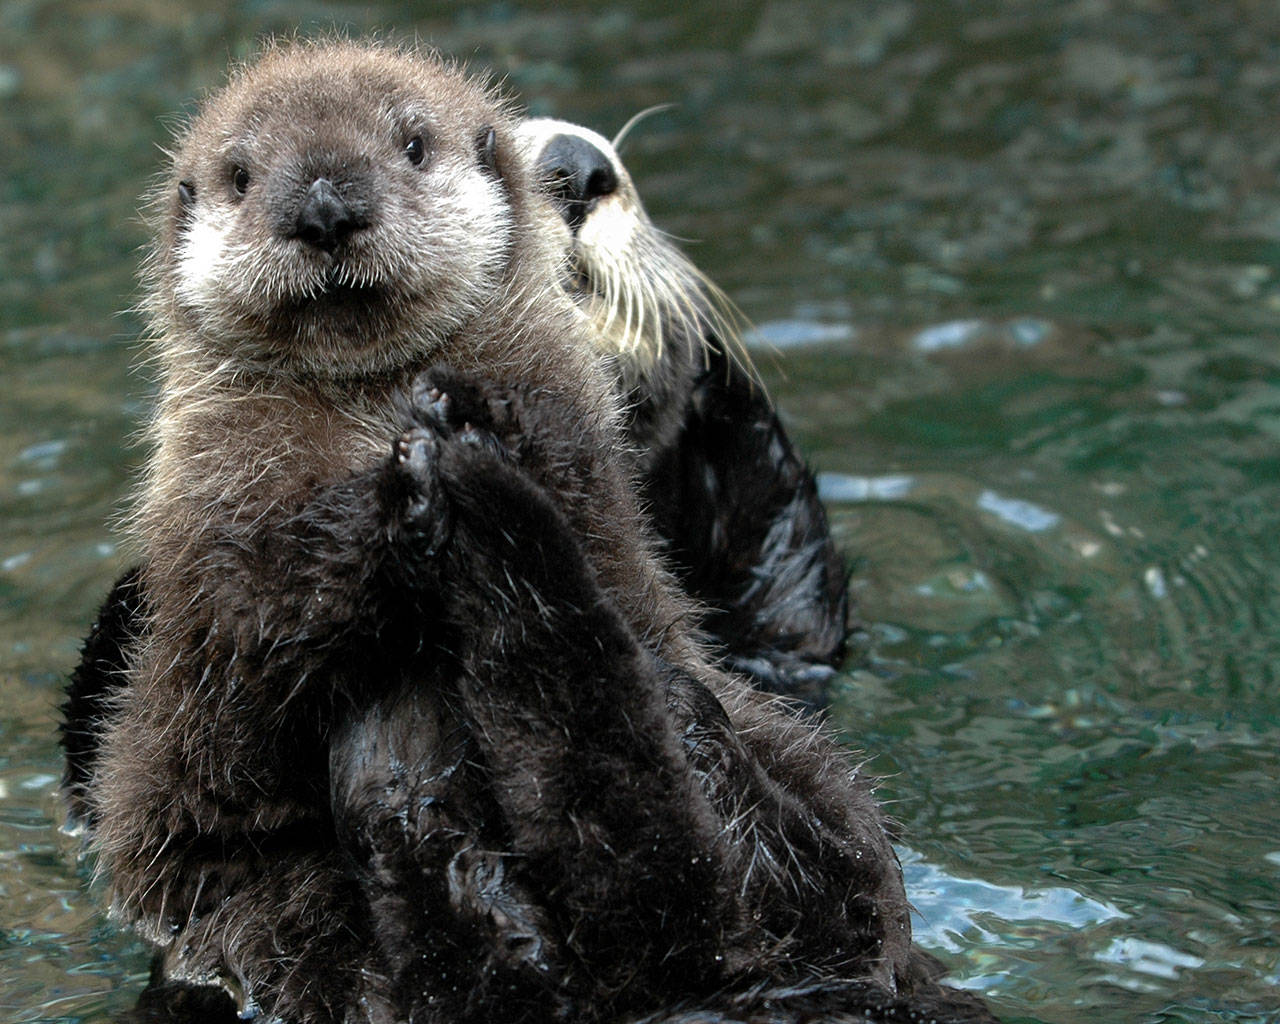 A mother sea otter shows off her young pup. (The Whale Museum)